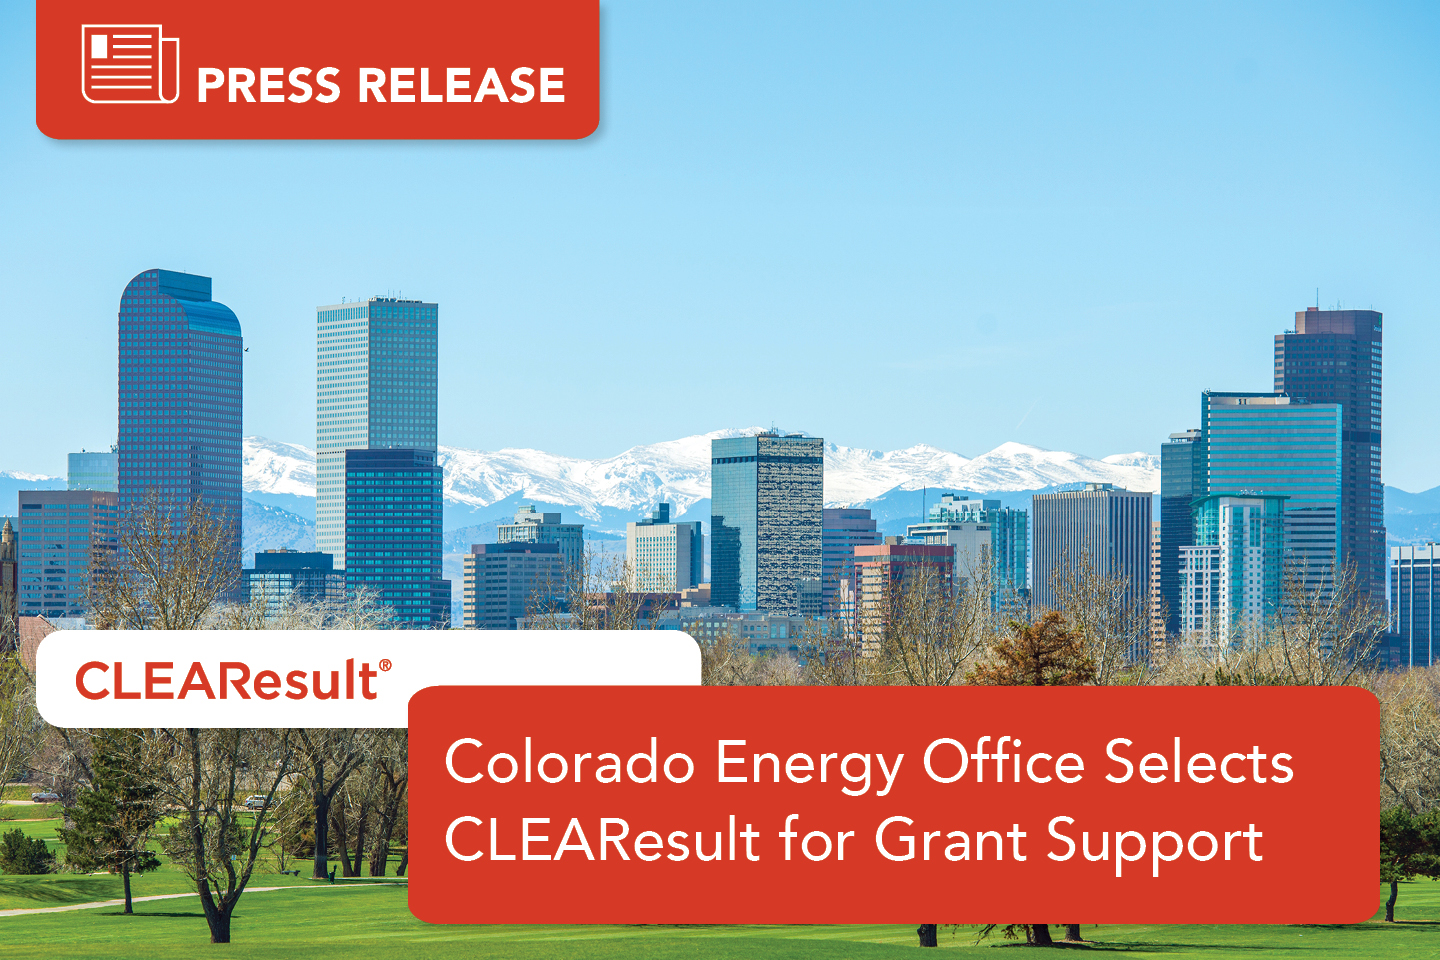 Colorado Energy Office Selects CLEAResult for Grant Support